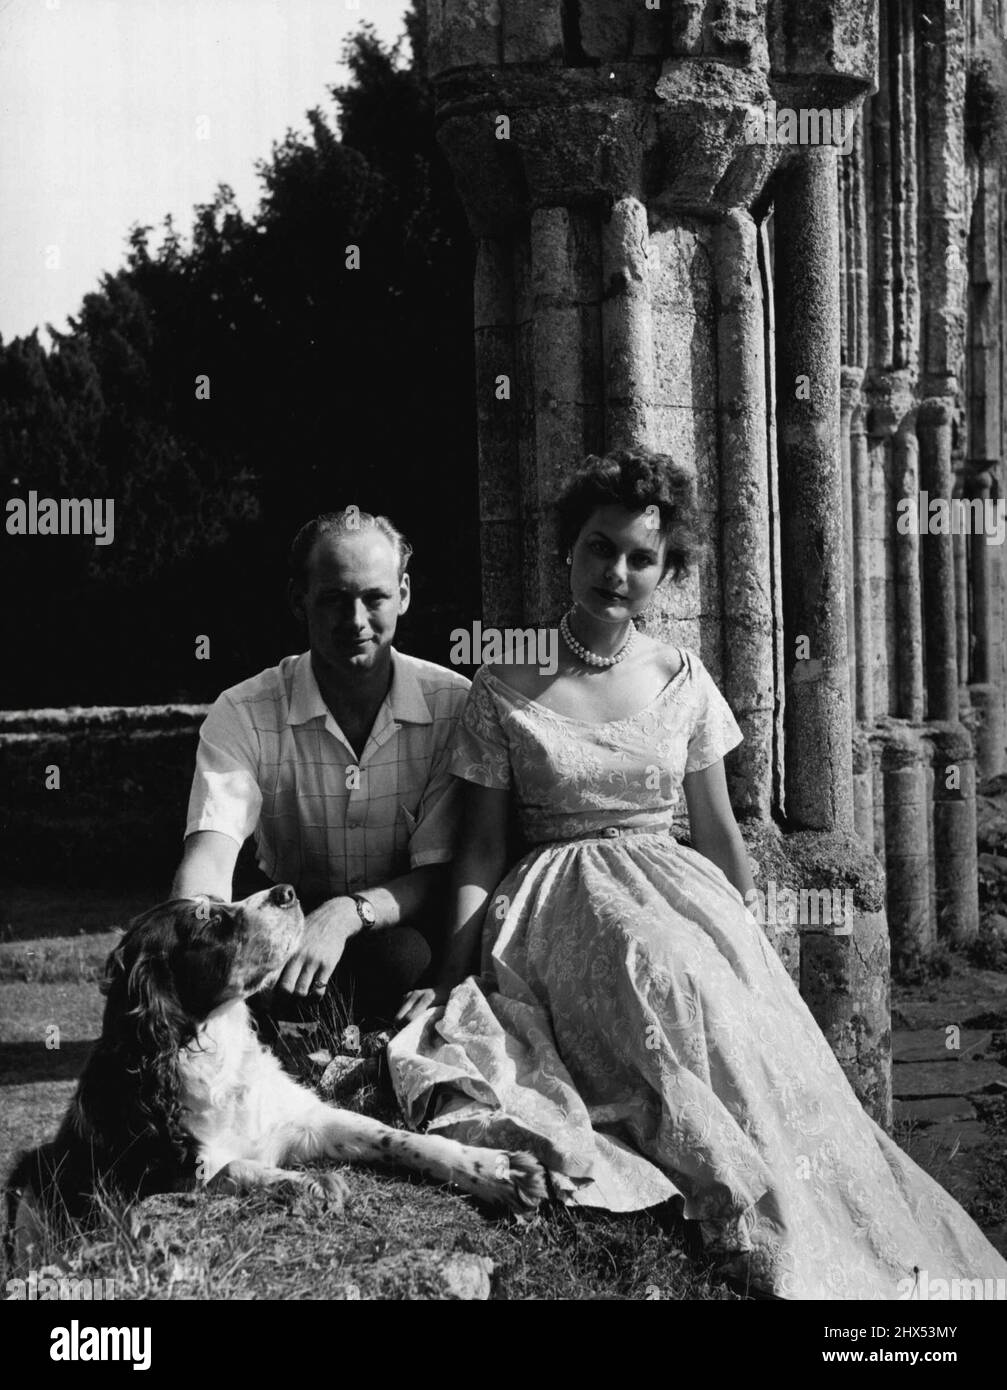 Lord Montagu Of Beaulieu With His Fiancee Miss Ann Gage -- Edward John Barrington Douglas-Scott-Montagu, 3rd Baron Montagu of Beaulieu, photographed with his fiancee, Miss Ann Gage, in the grounds of Palace House, Beaulieu, Lord Montagu's mansion in Hampshire. Miss Gage is the daughter of Major and Mrs. Edward Gage of Chyknell, Bridgnorth, Shropshire. August 21, 1953. (Photo by Anthony Armstrong-Jones, Camera Press). Stock Photo